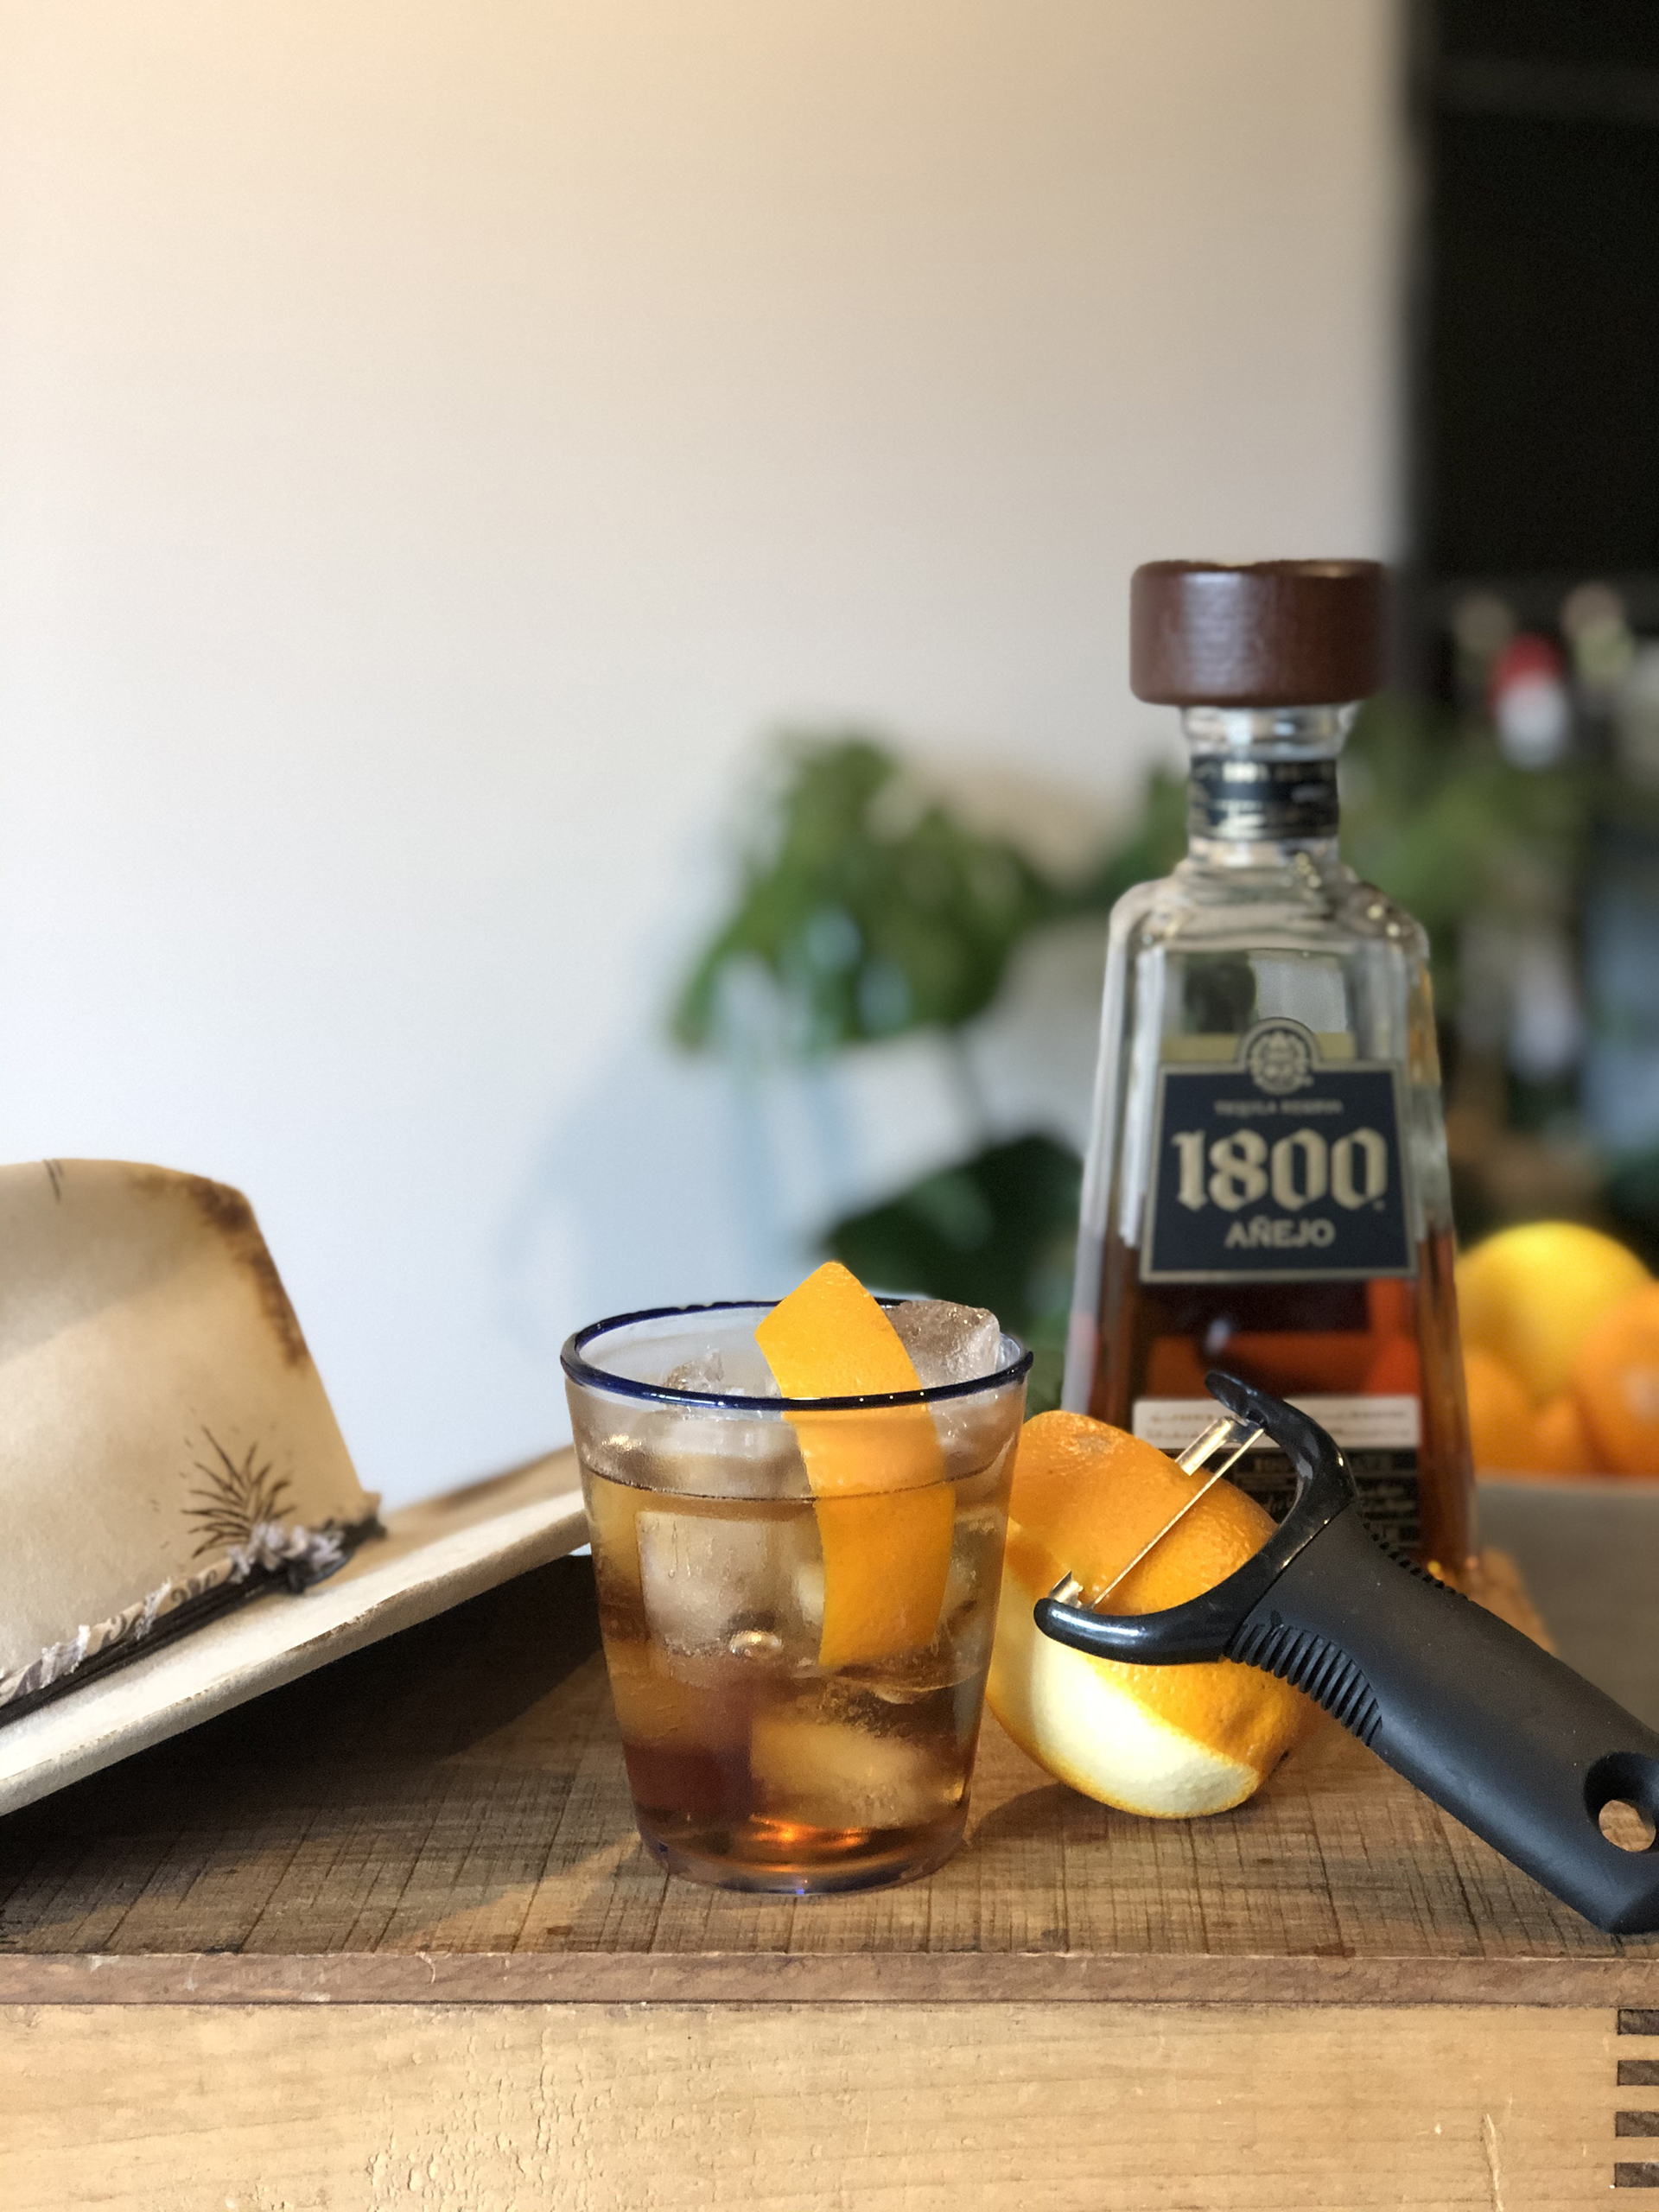 1800 Anejo alongside an Old Fashioned cocktail